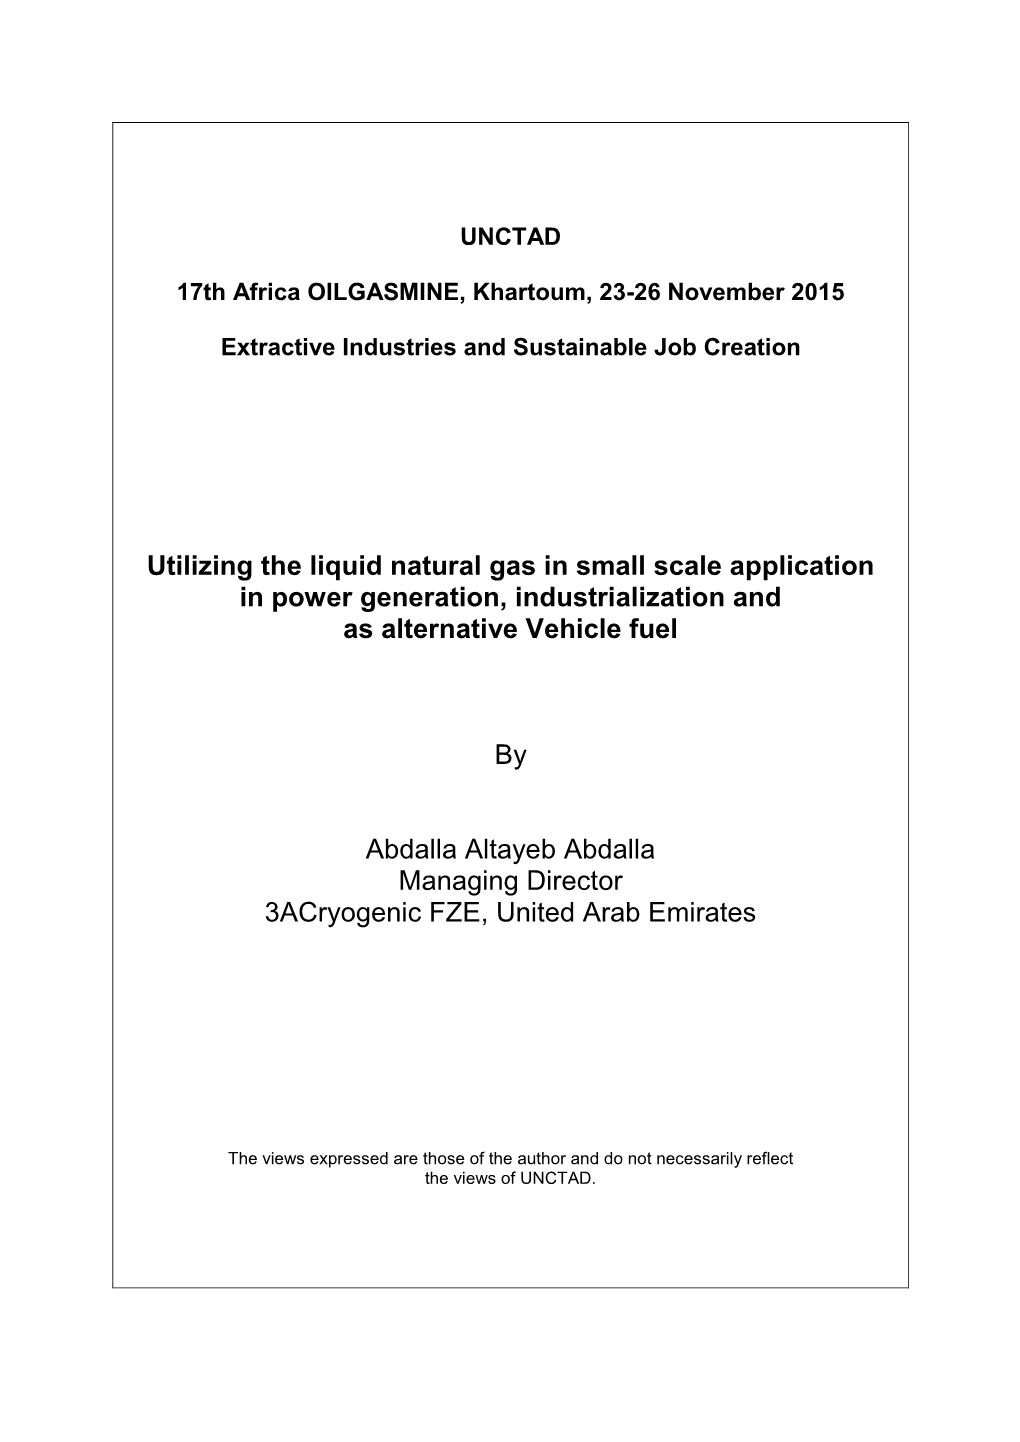 Utilizing the Liquid Natural Gas in Small Scale Application in Power Generation, Ndustrialization and As Alternative Vehicle